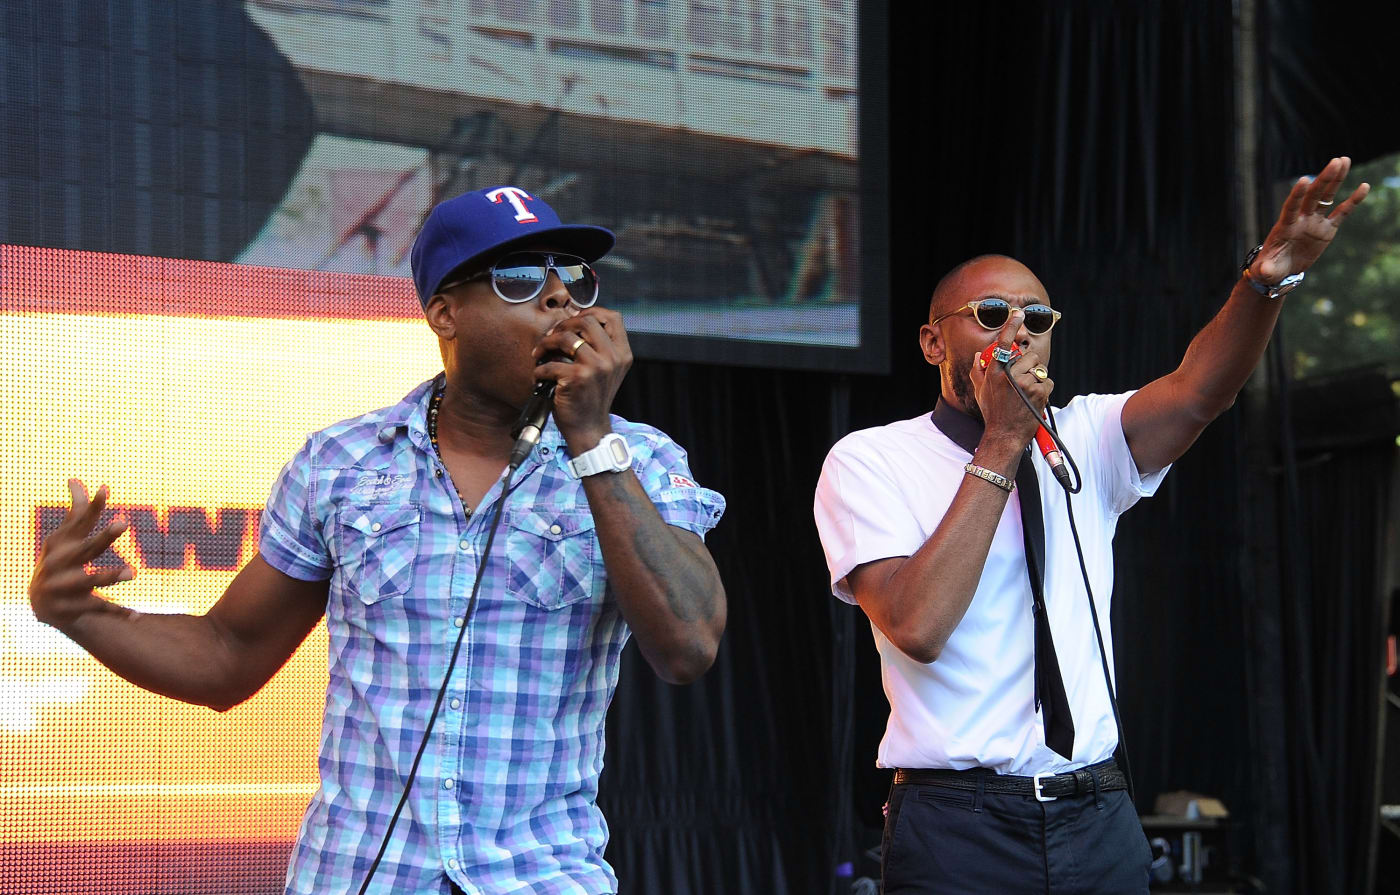 Talib Kweli and Mos Def of Black Star perform during the 2011 Rock The Bells Music Festival.